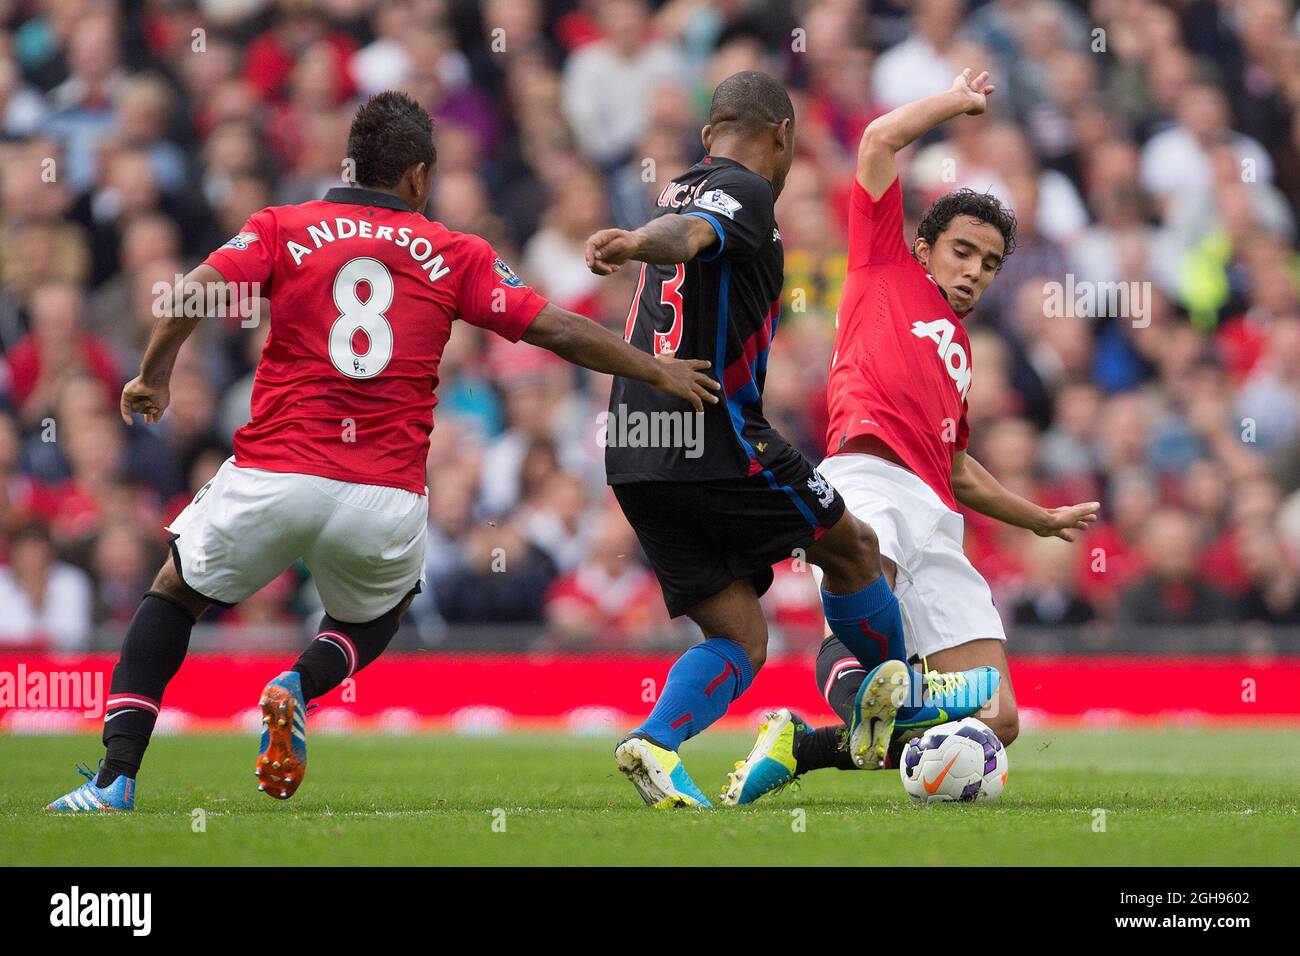 Rafael Pereira da Silva of Manchester United challenges Jason Puncheon of Crystal Palace during the Barclays Premier League match between Manchester United and Crystal Palace at Old Trafford, Manchester on September 14, 2013. Pic Philip Oldham. Stock Photo